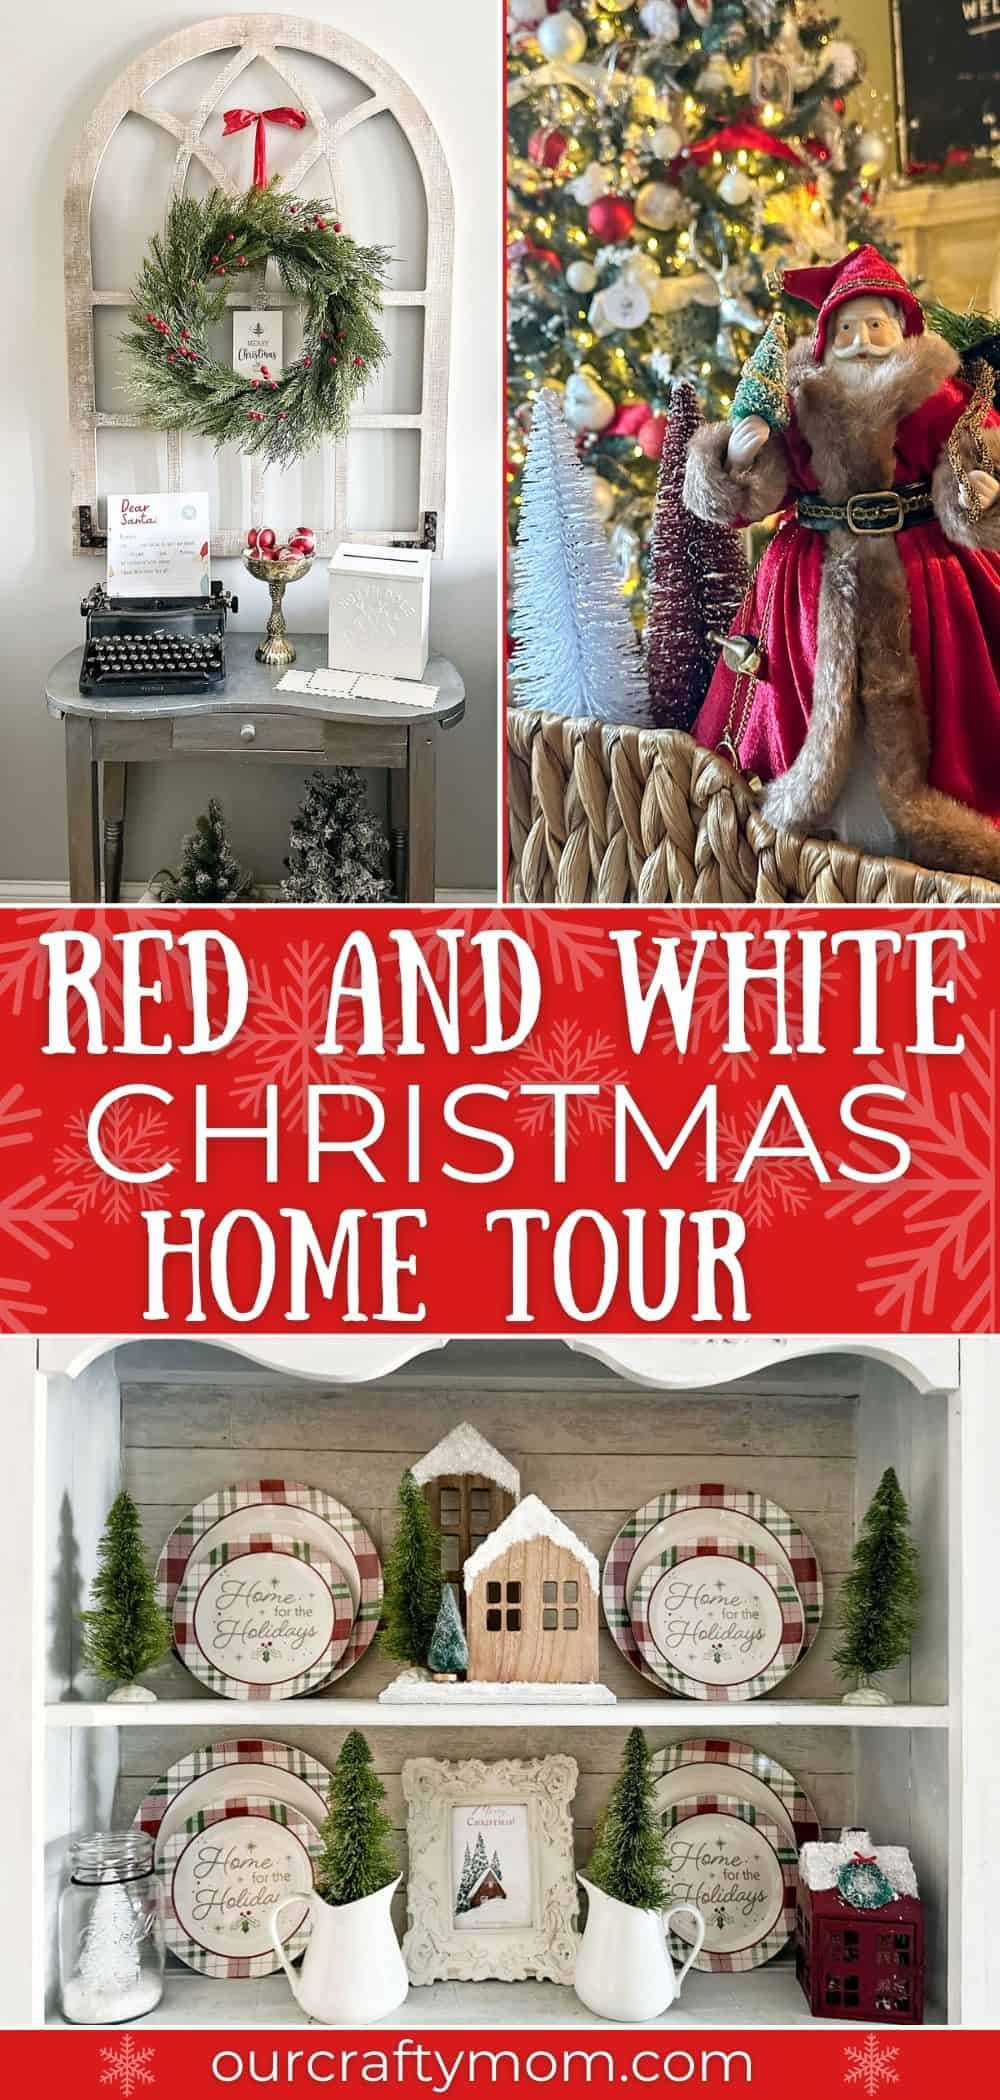 red and white Christmas decorations pin collage with text